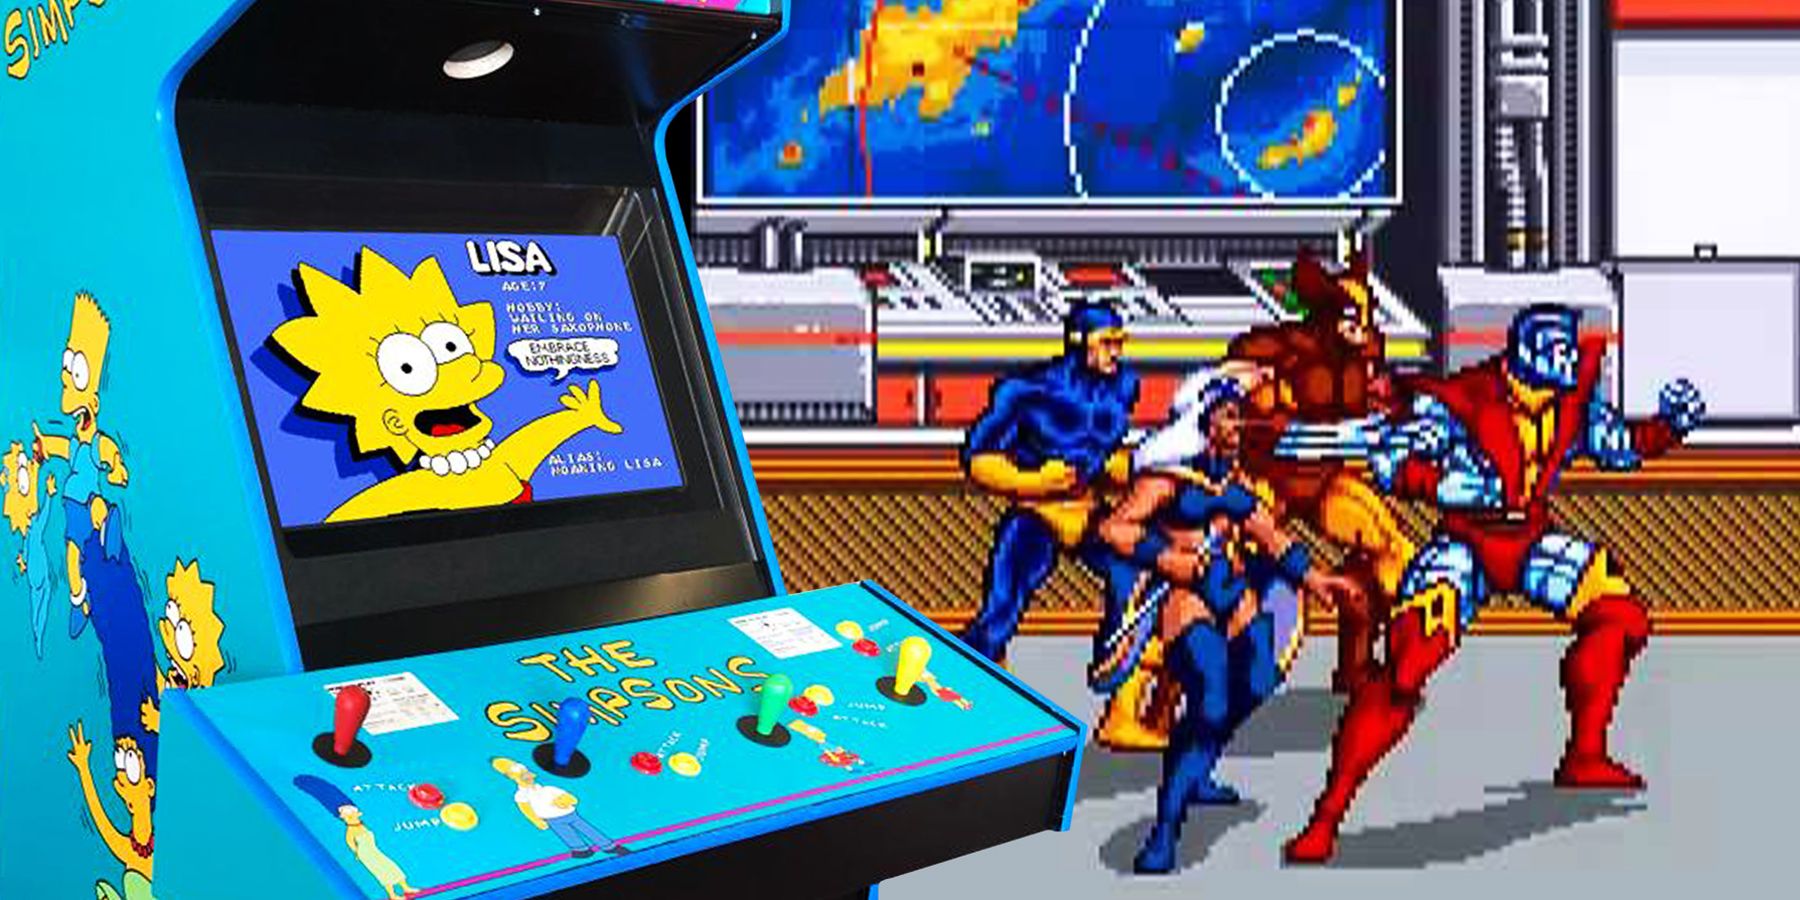 Simpsons: The Arcade Game arcade machine and a screenshot of gameplay from arcade game X-Men